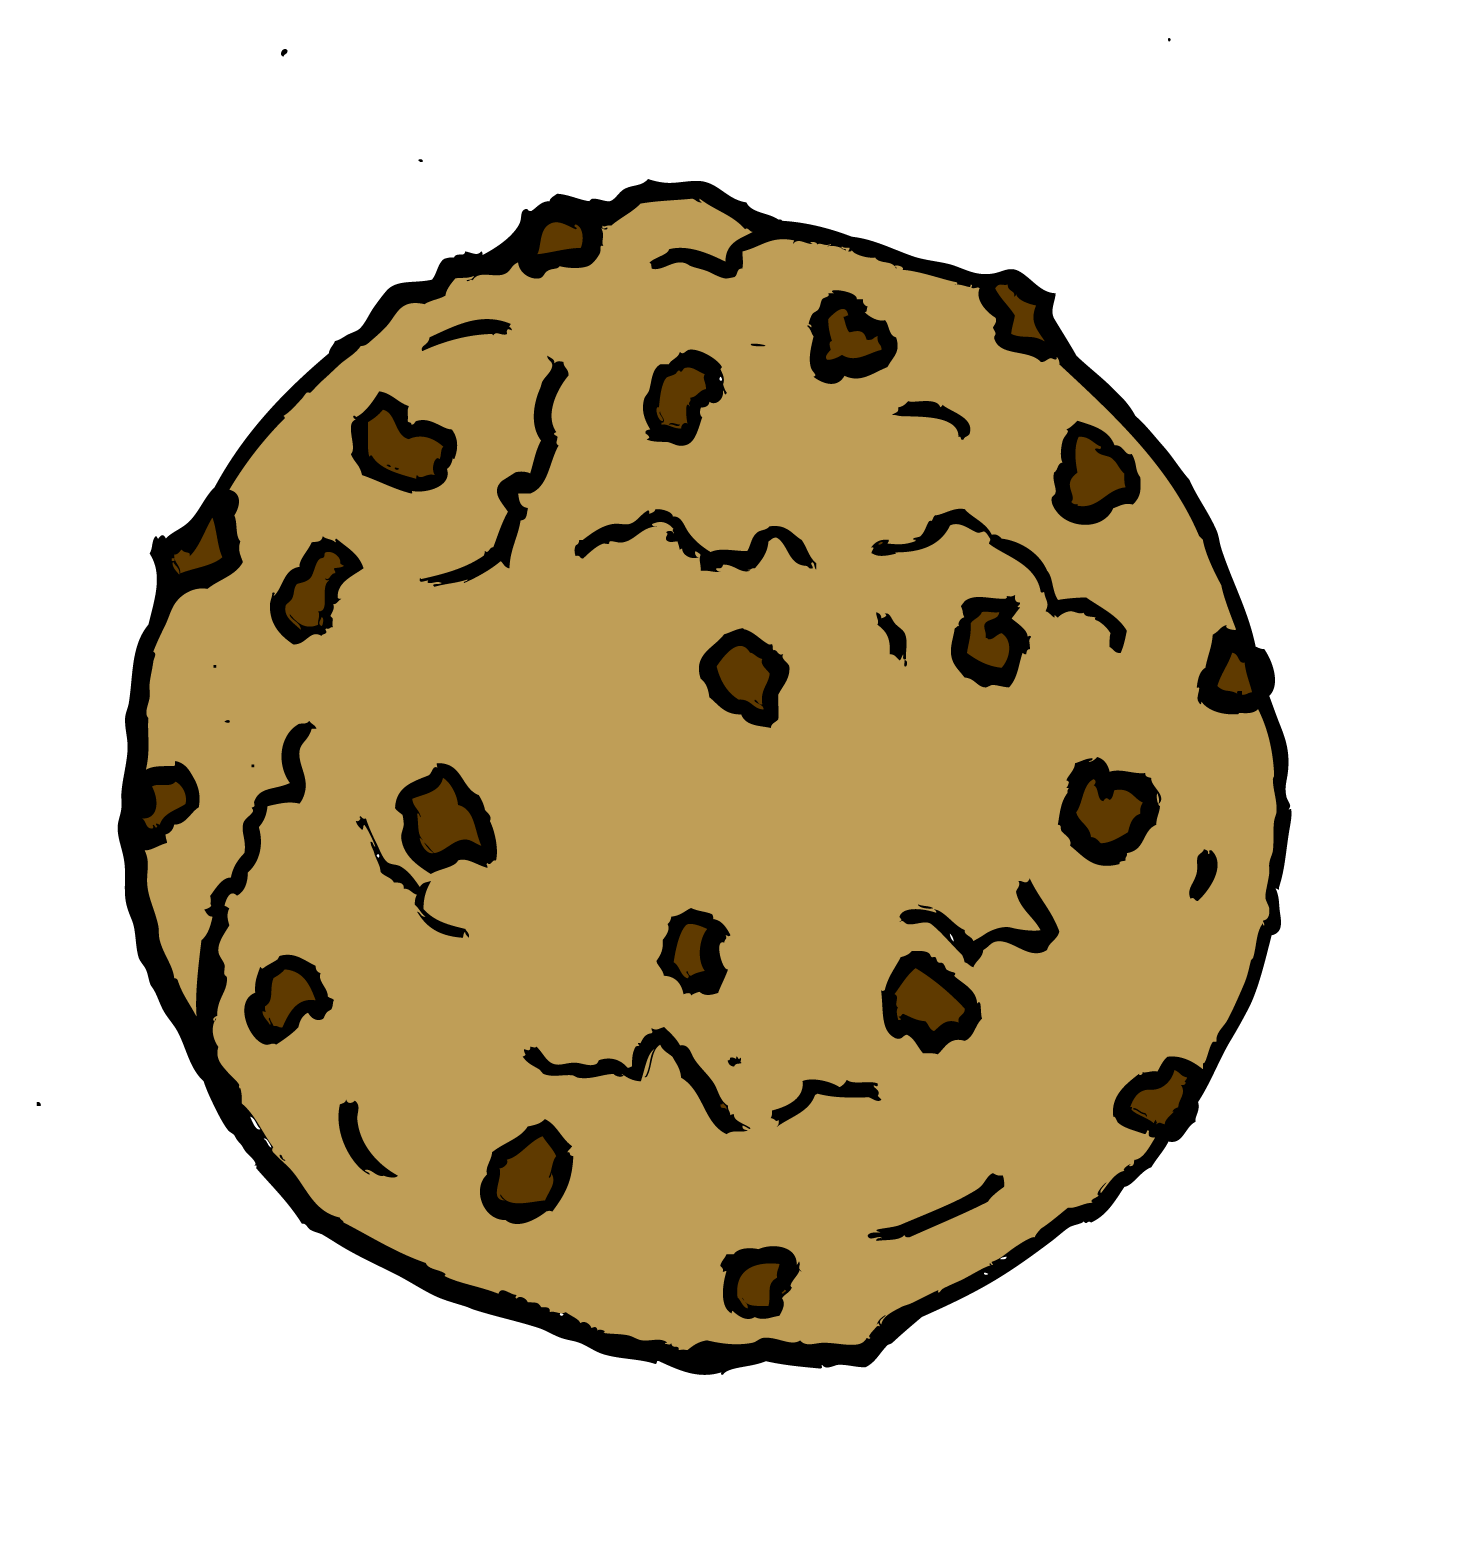 Chocolate Chip Cookie Clip Ar